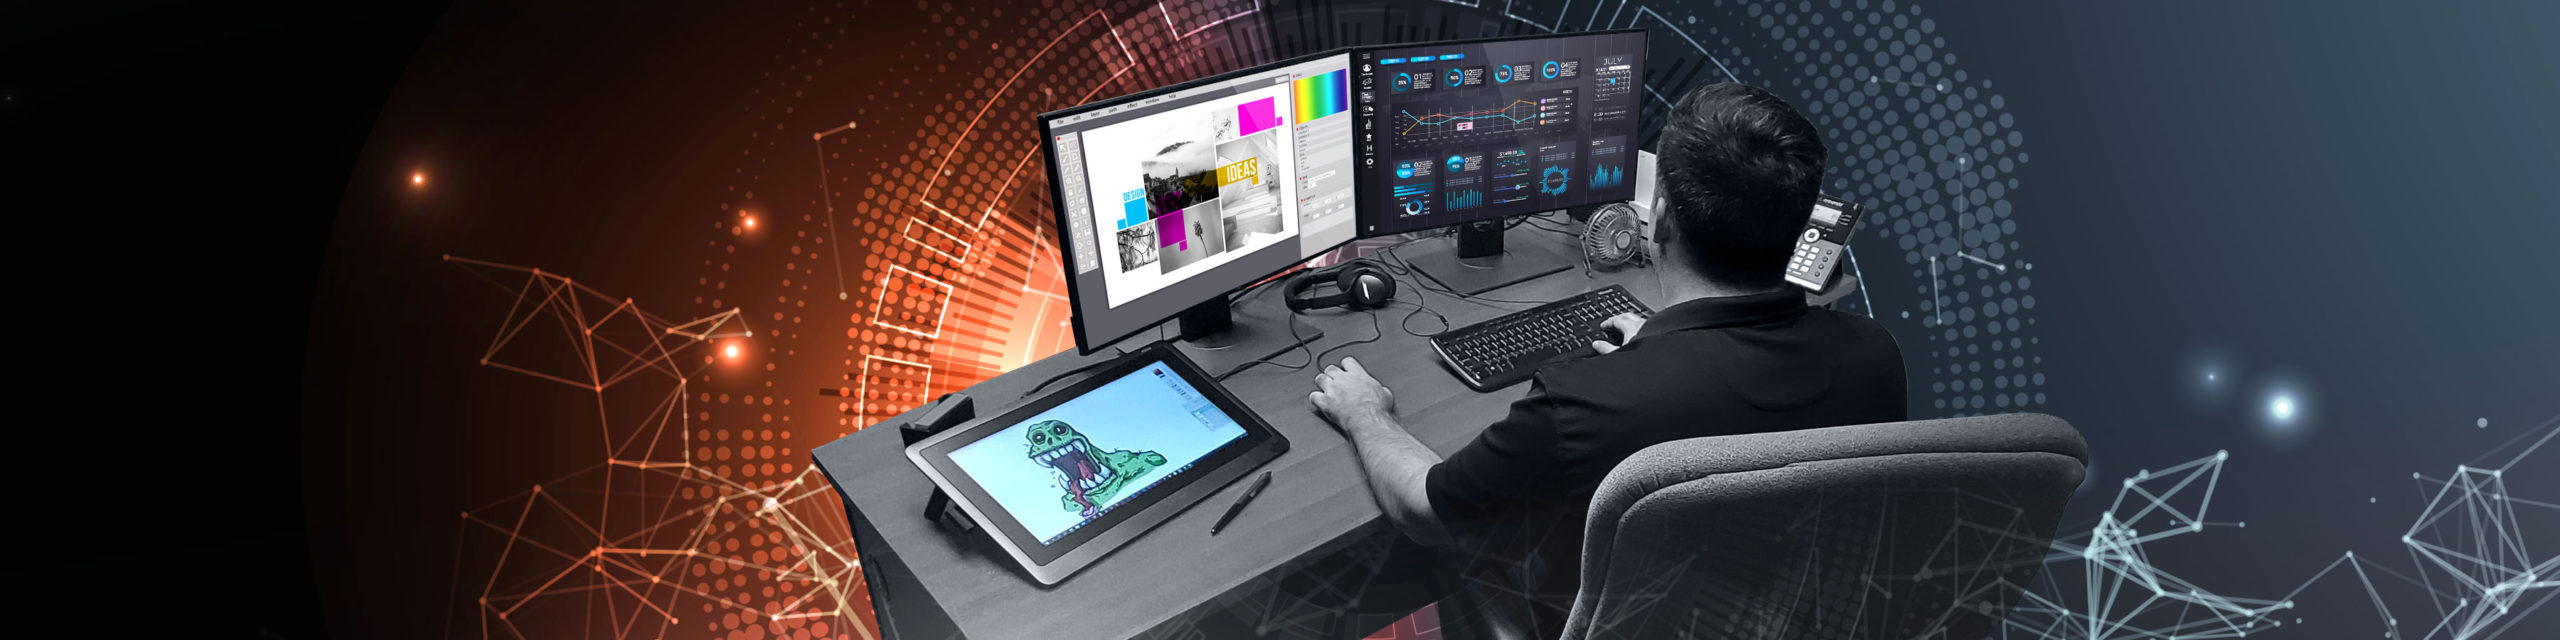 man working at computer on graphic design projects